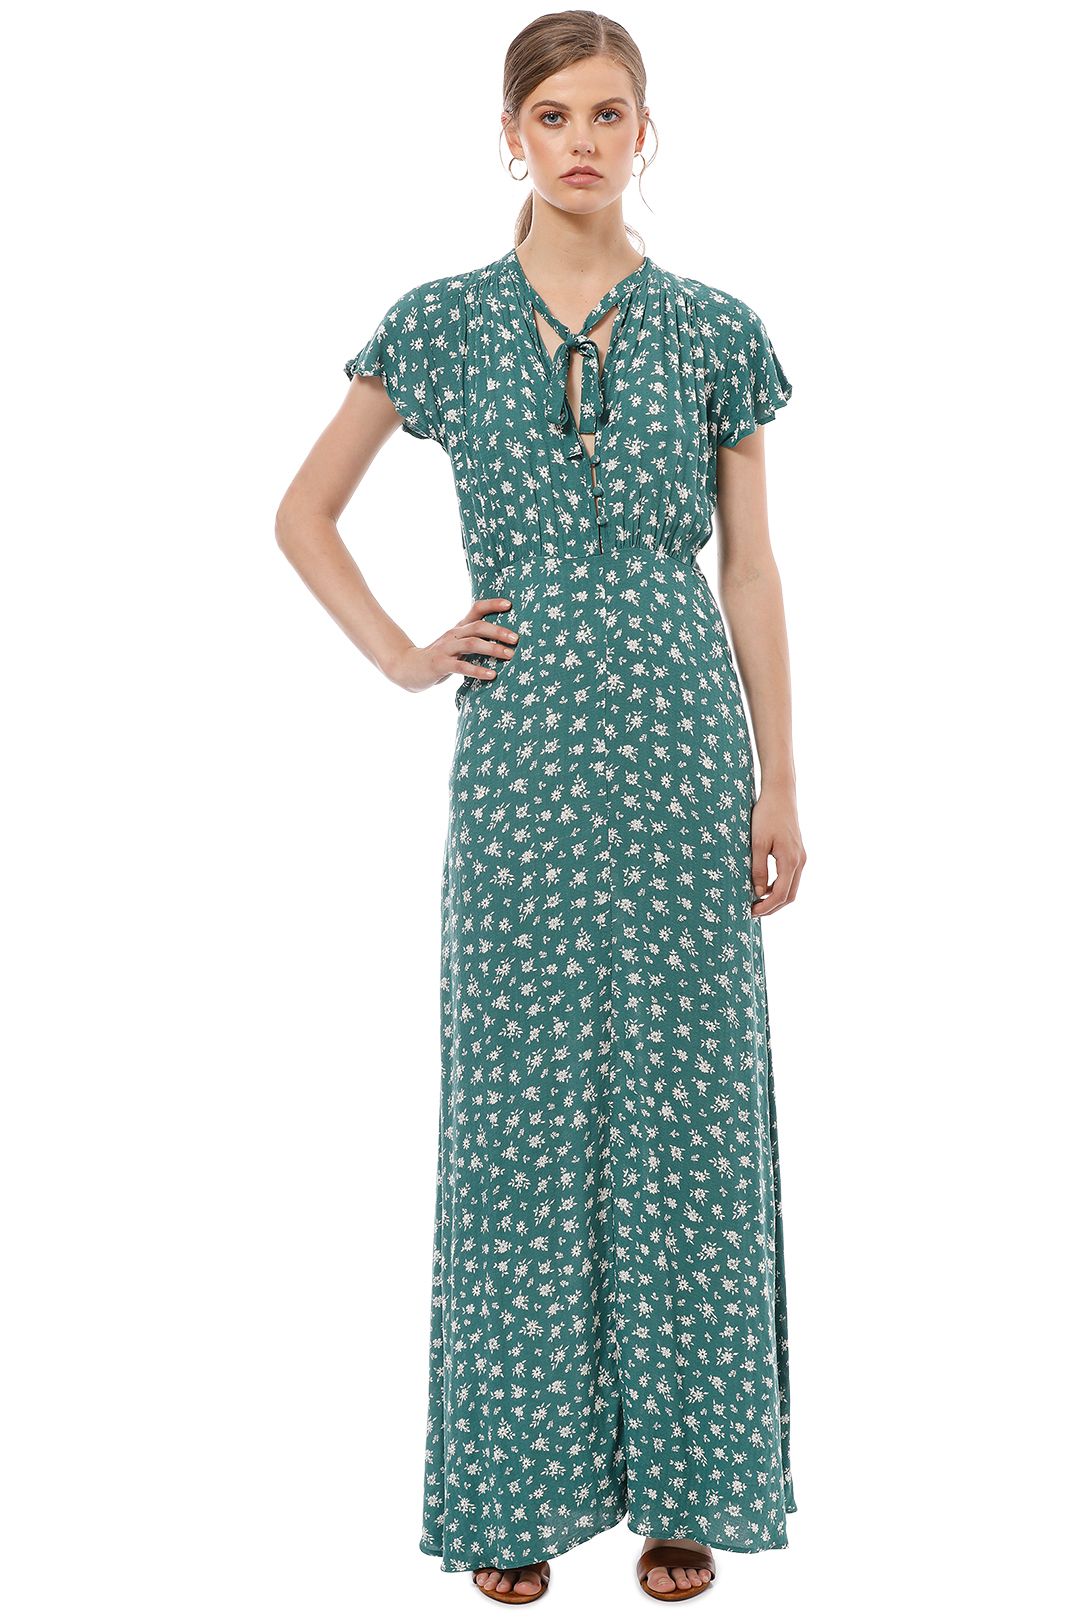 Auguste - Ava Wylde Maxi Dress - Sage - Front